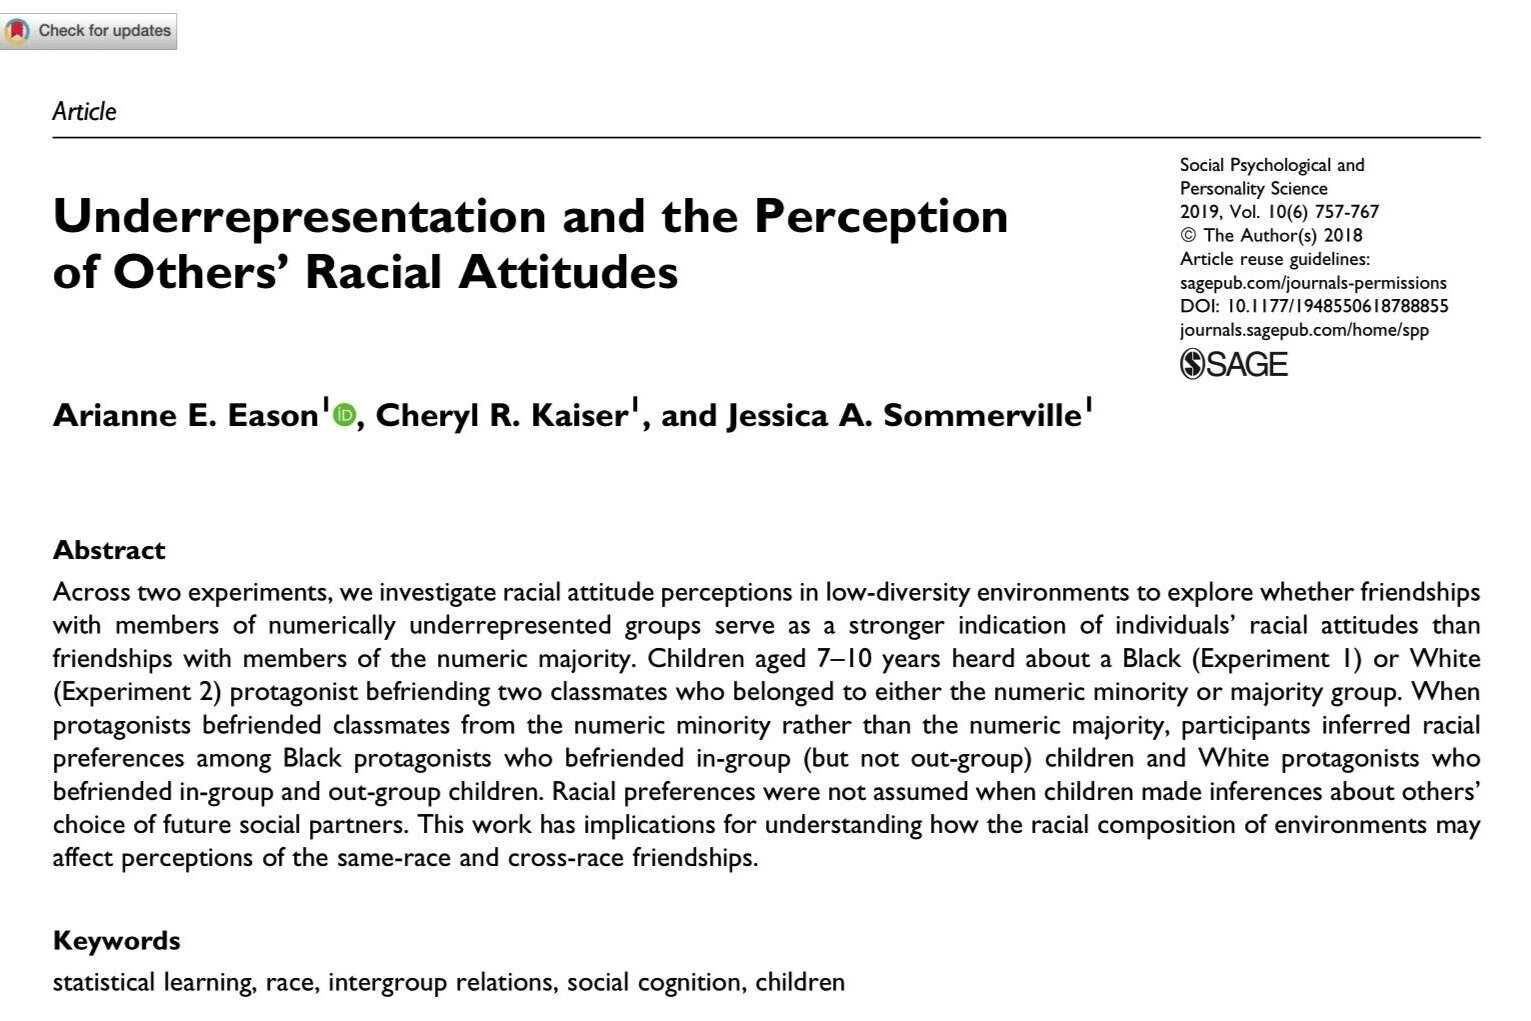 Underrepresentation and the Perception of Others’ Racial Attitudes